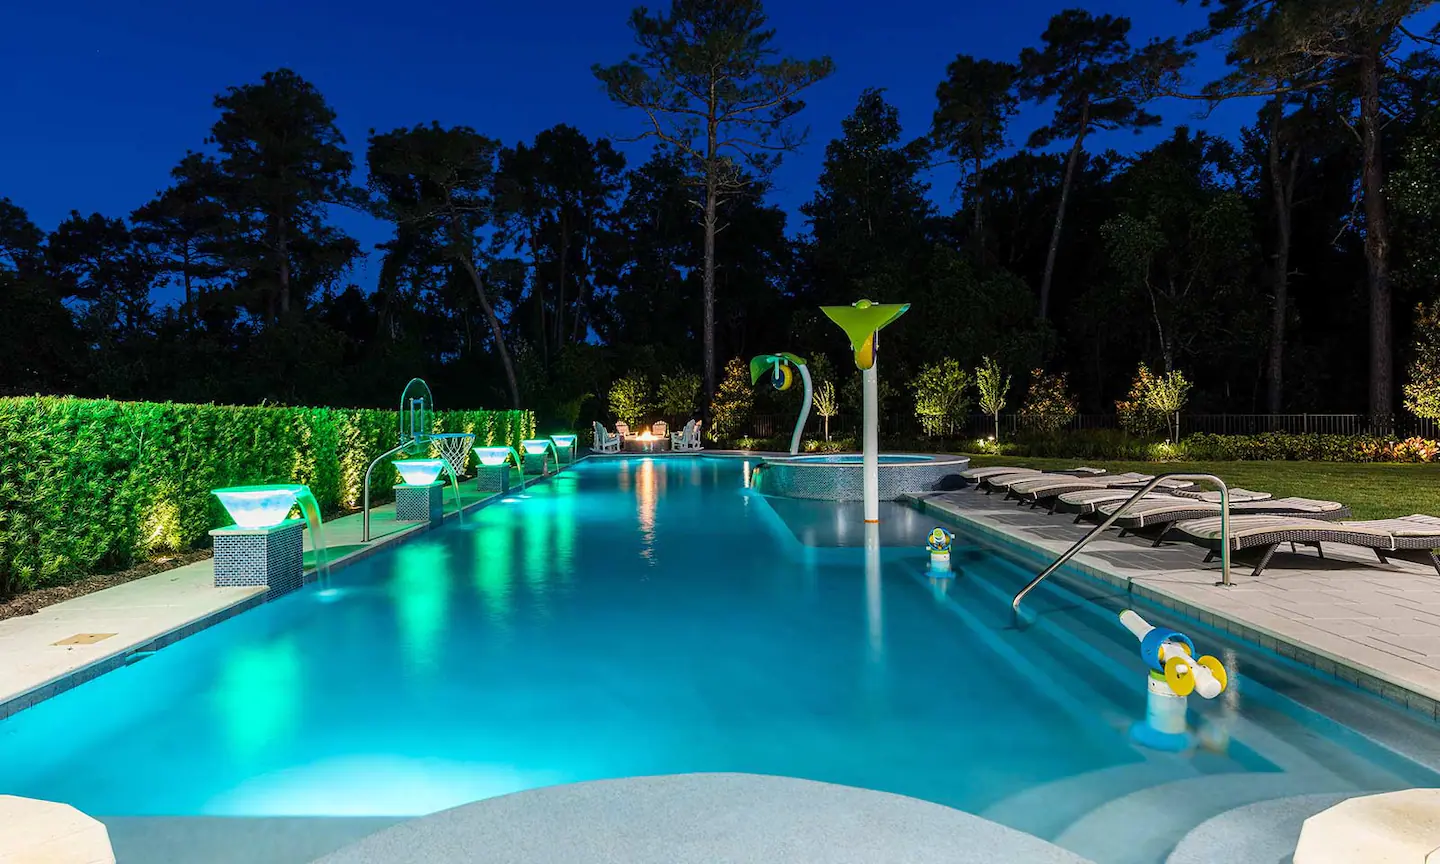 A stunning pool that gives a magical vibe.